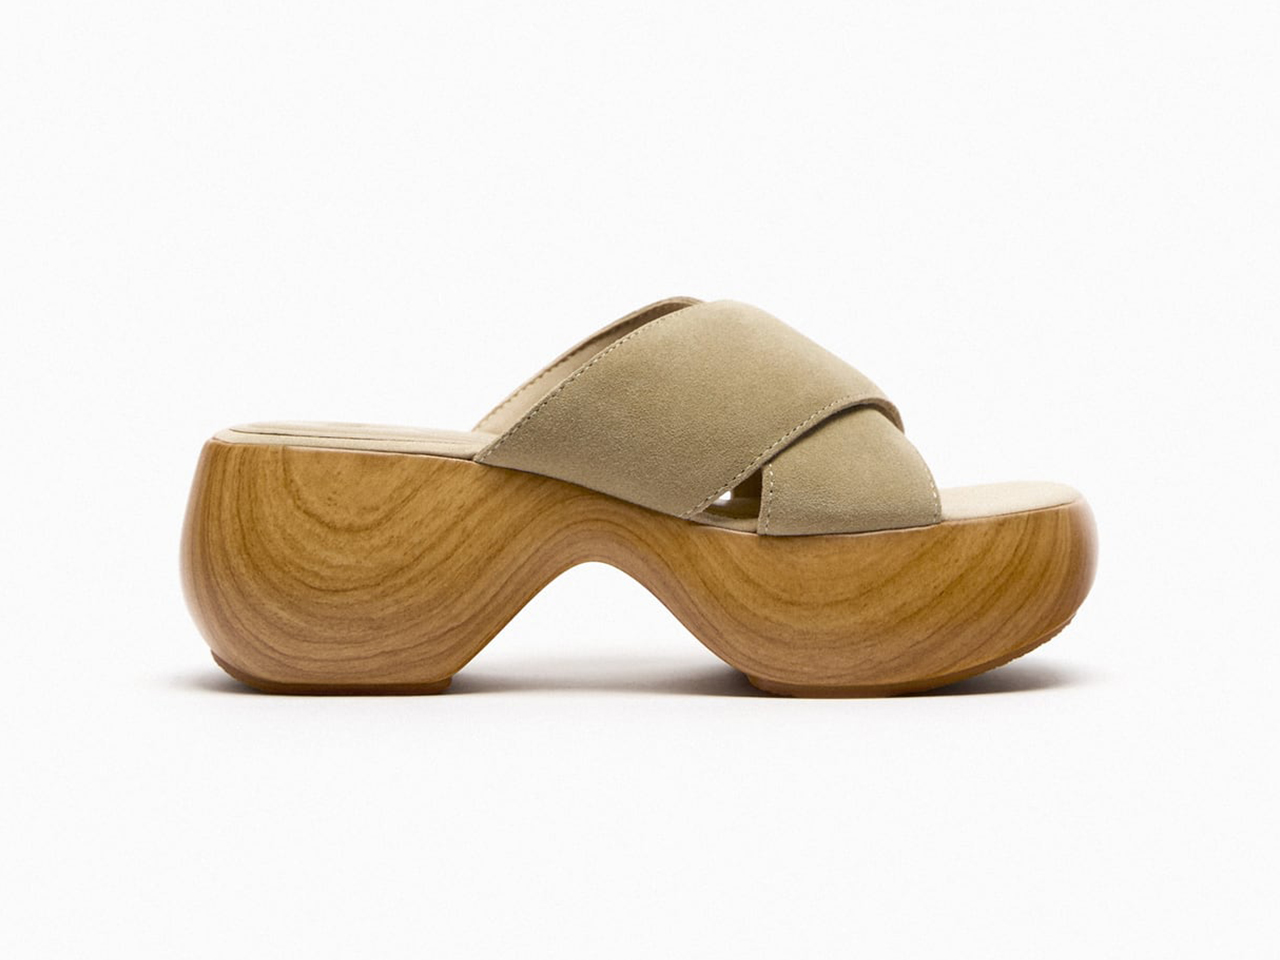 A side profile of a pair of sandals clogs from Zara with a wooden bubble sole.